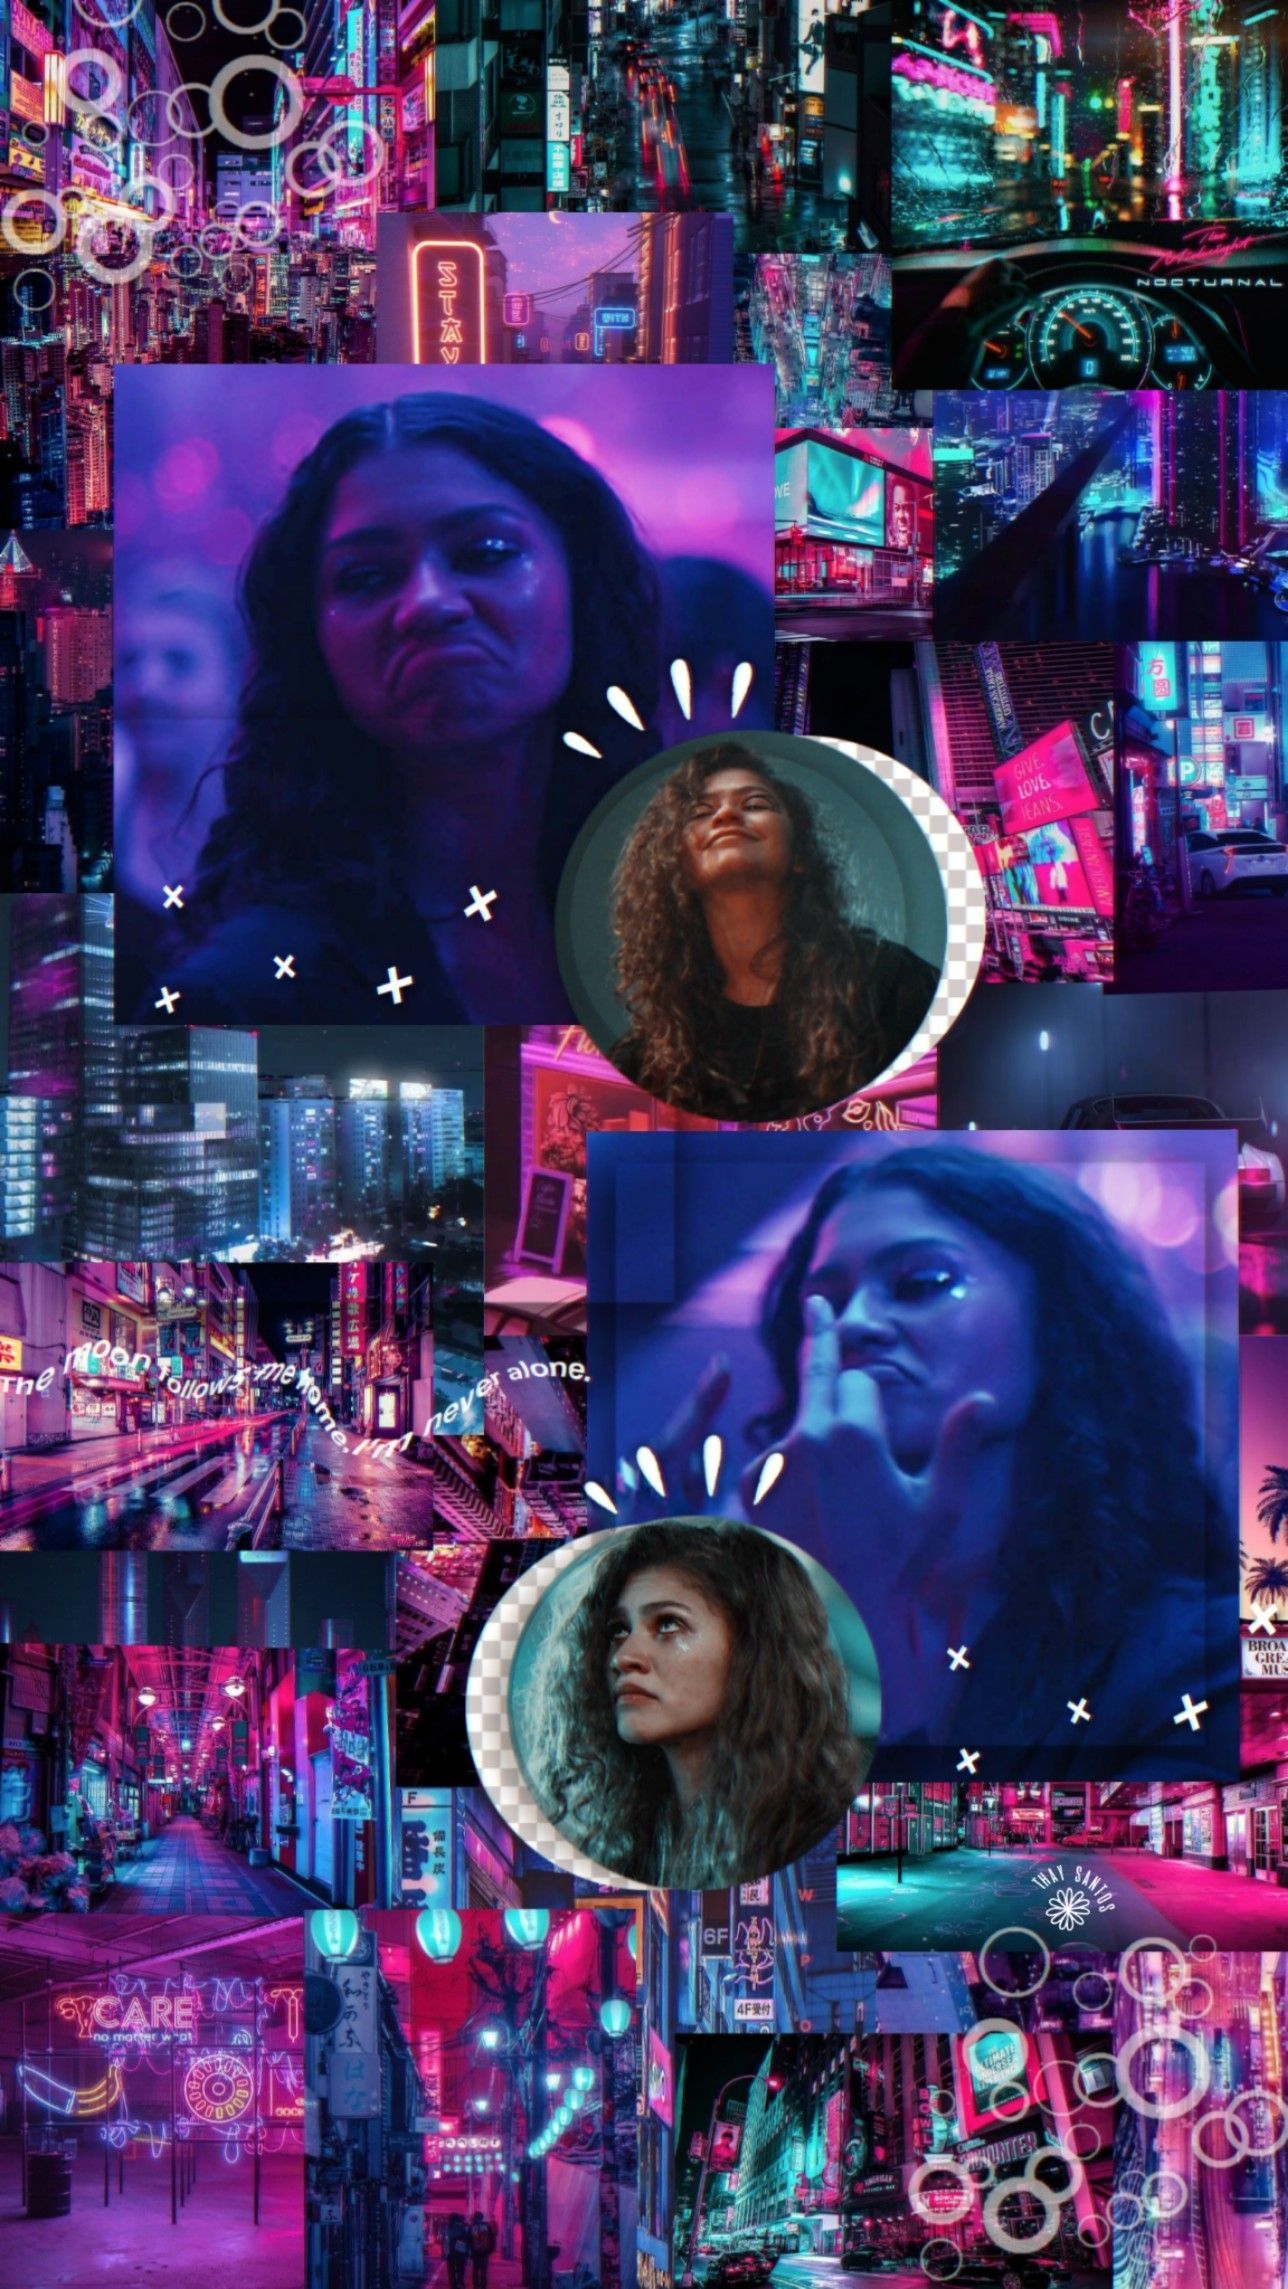 A collage of pictures with neon lights - Euphoria